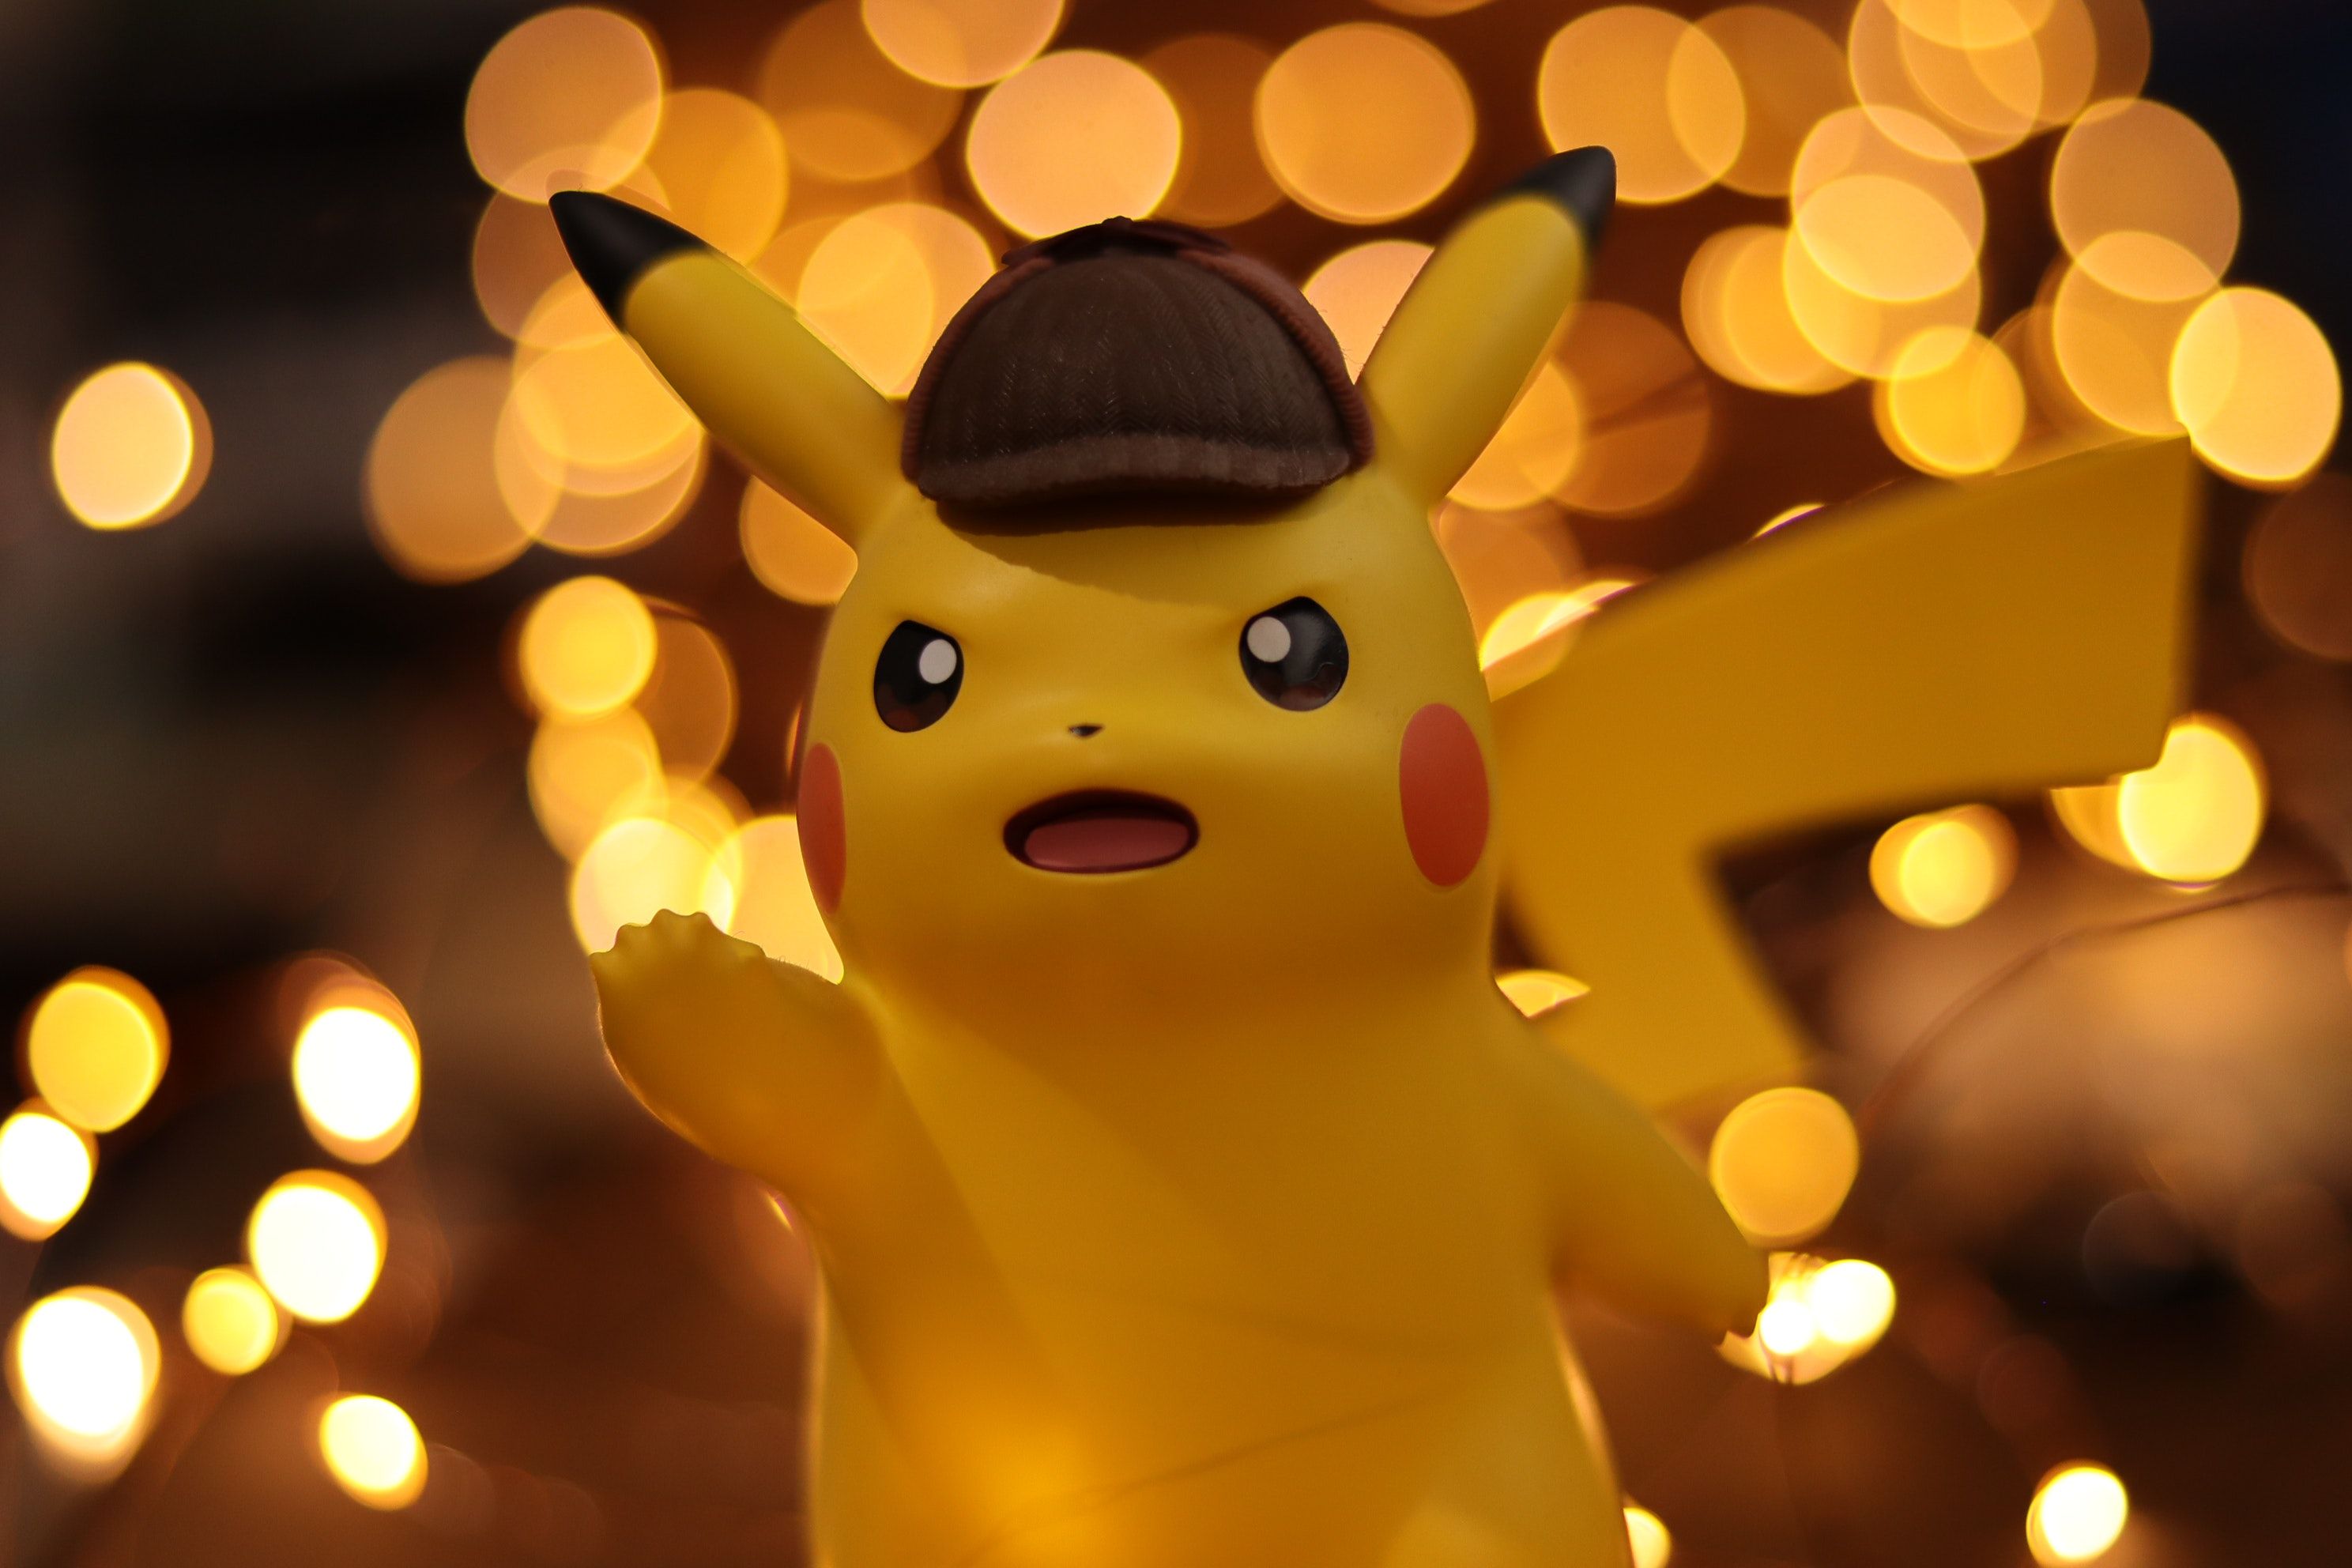 Photo of Pikachu dressed as a detective